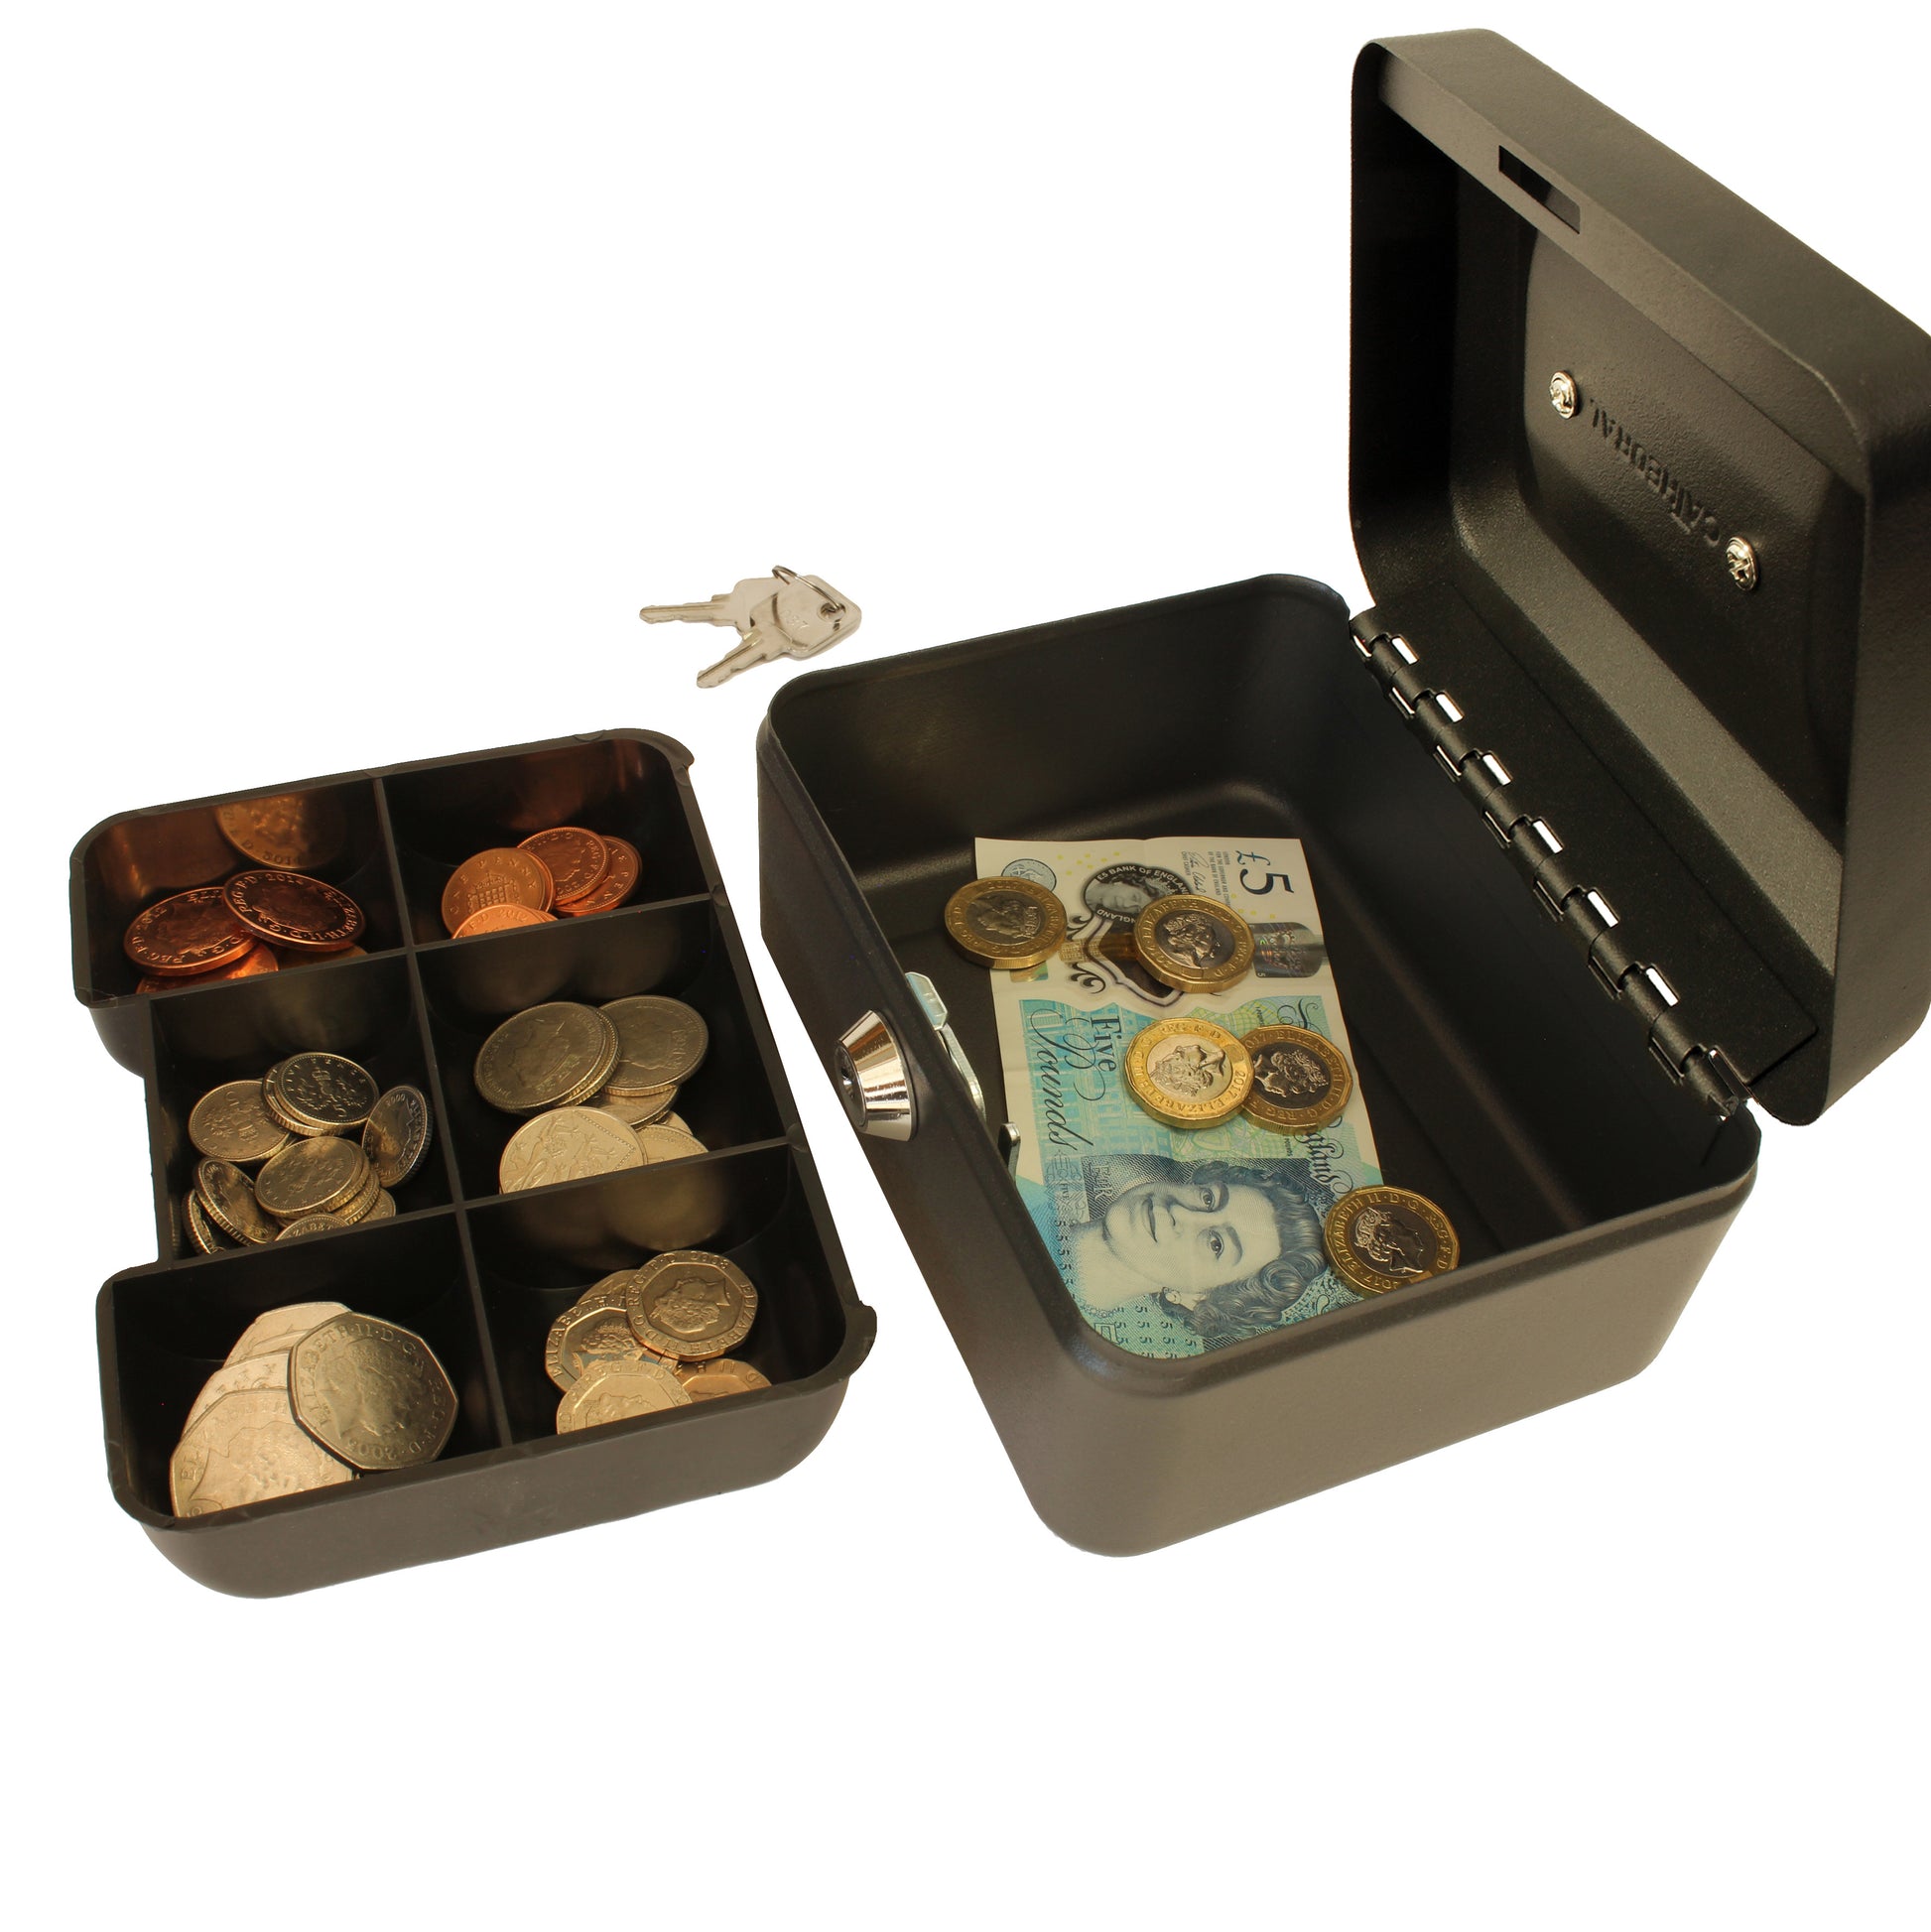 An open, matte black, 6-inch key lockable cash box with a removable 6-compartment coin tray, displaying an assortment of coins and banknotes. Two keys are placed beside the box, indicating its secure lock mechanism.